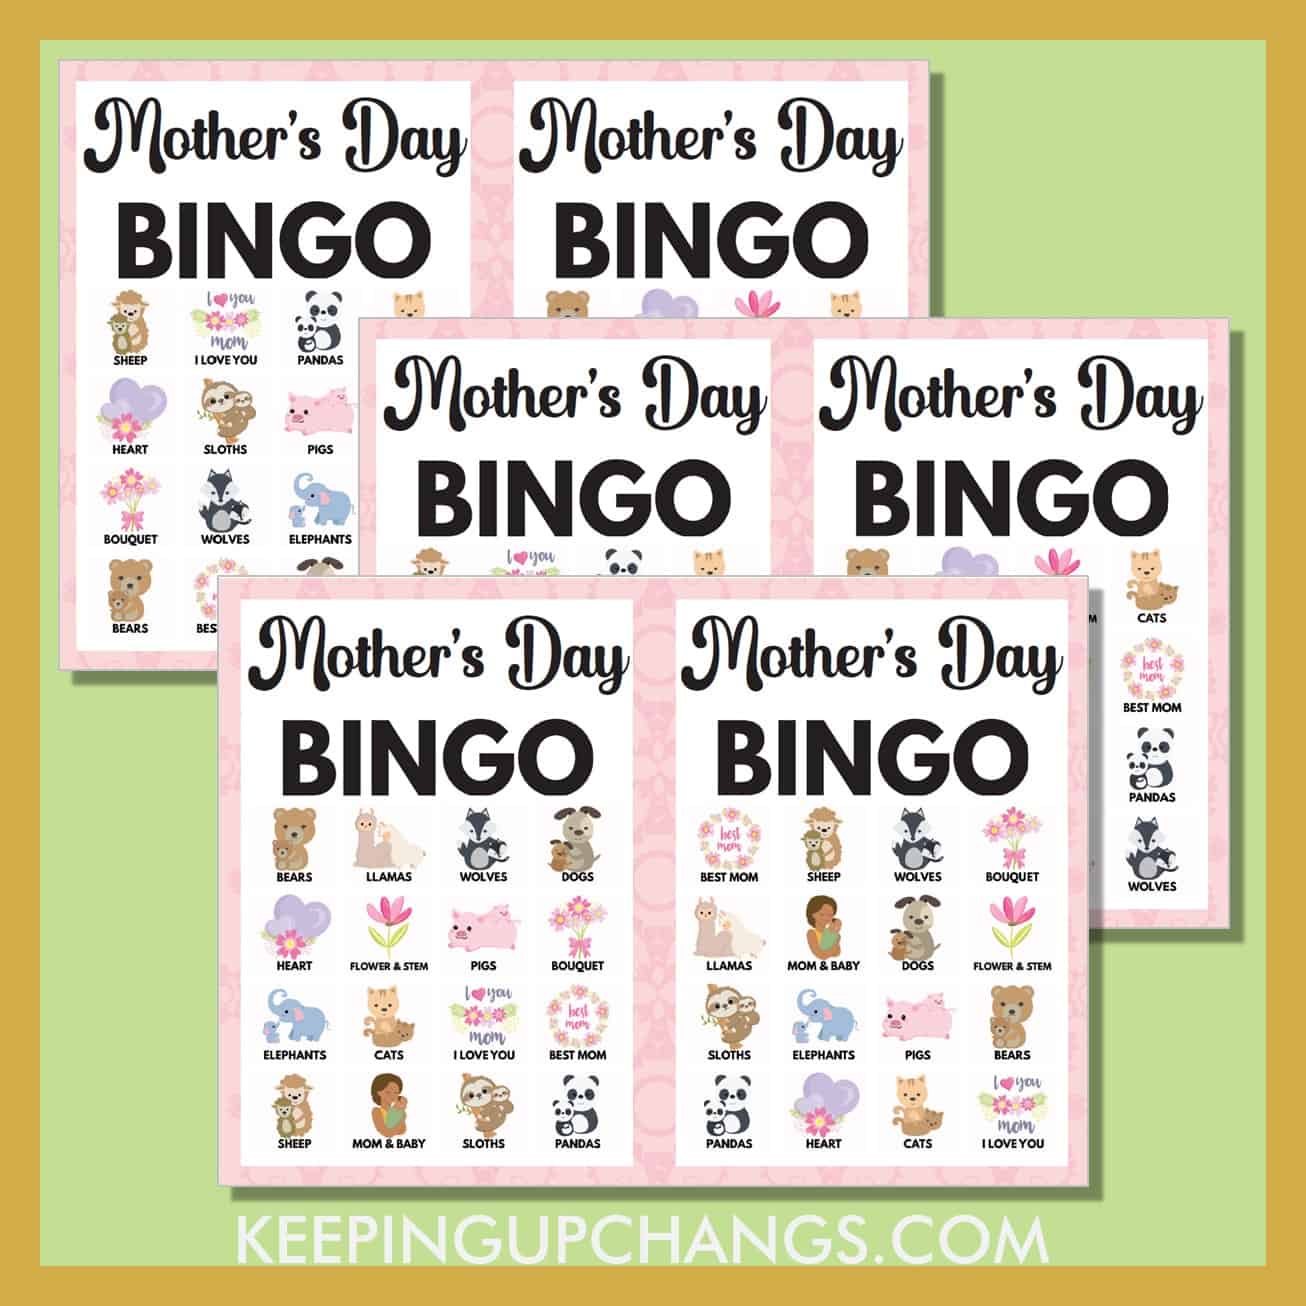 free mother's day bingo 4x4 game cards.